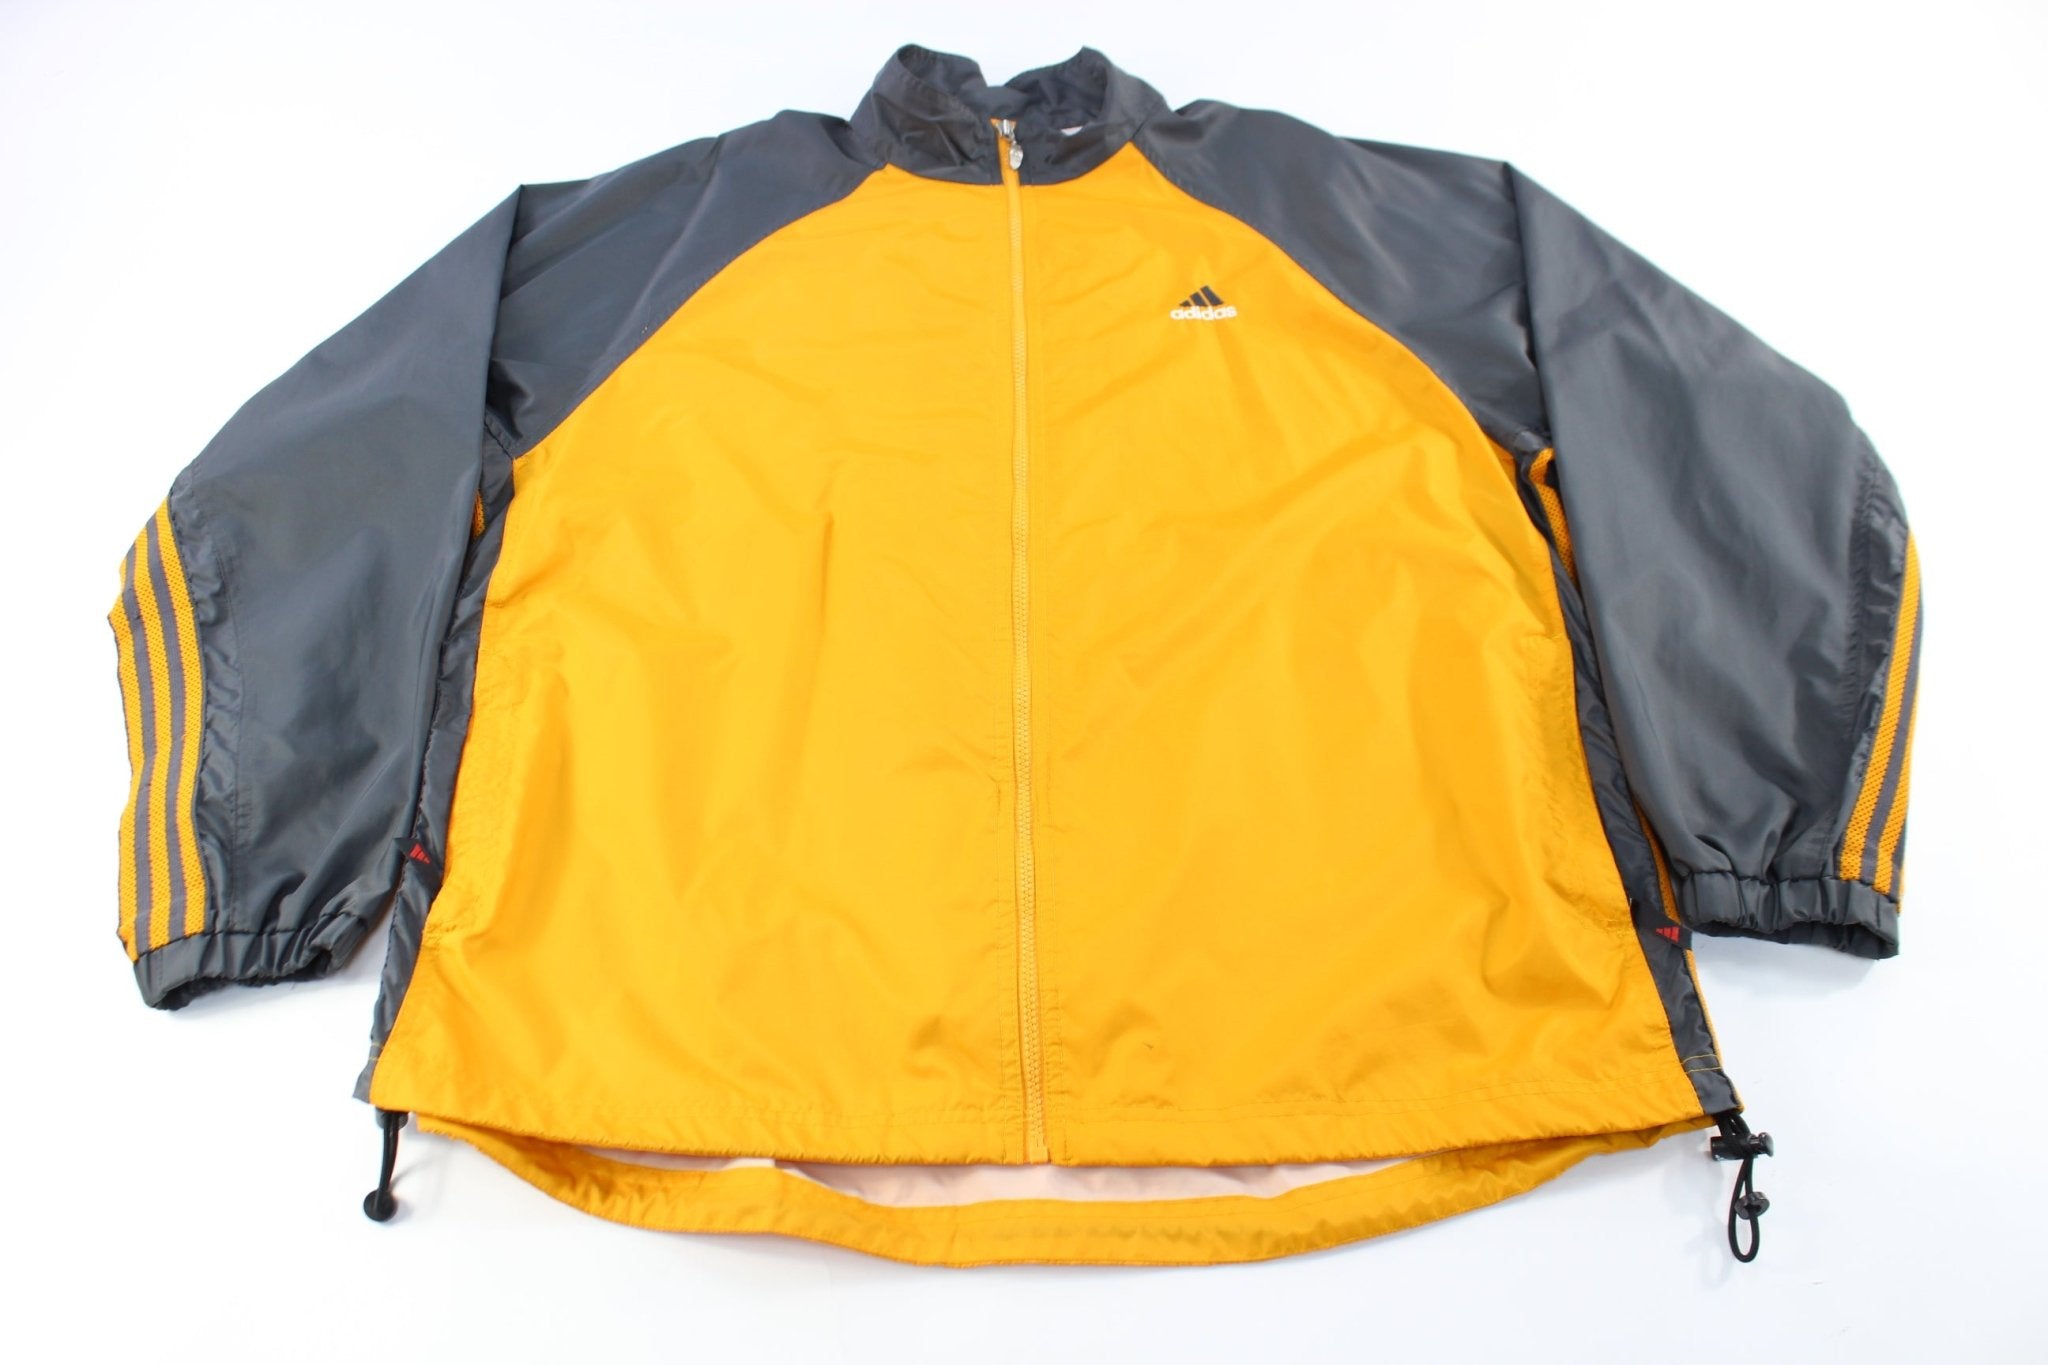 Adidas Embroidered Logo Yellow & Grey Zip Up Jacket - ThriftedThreads.com